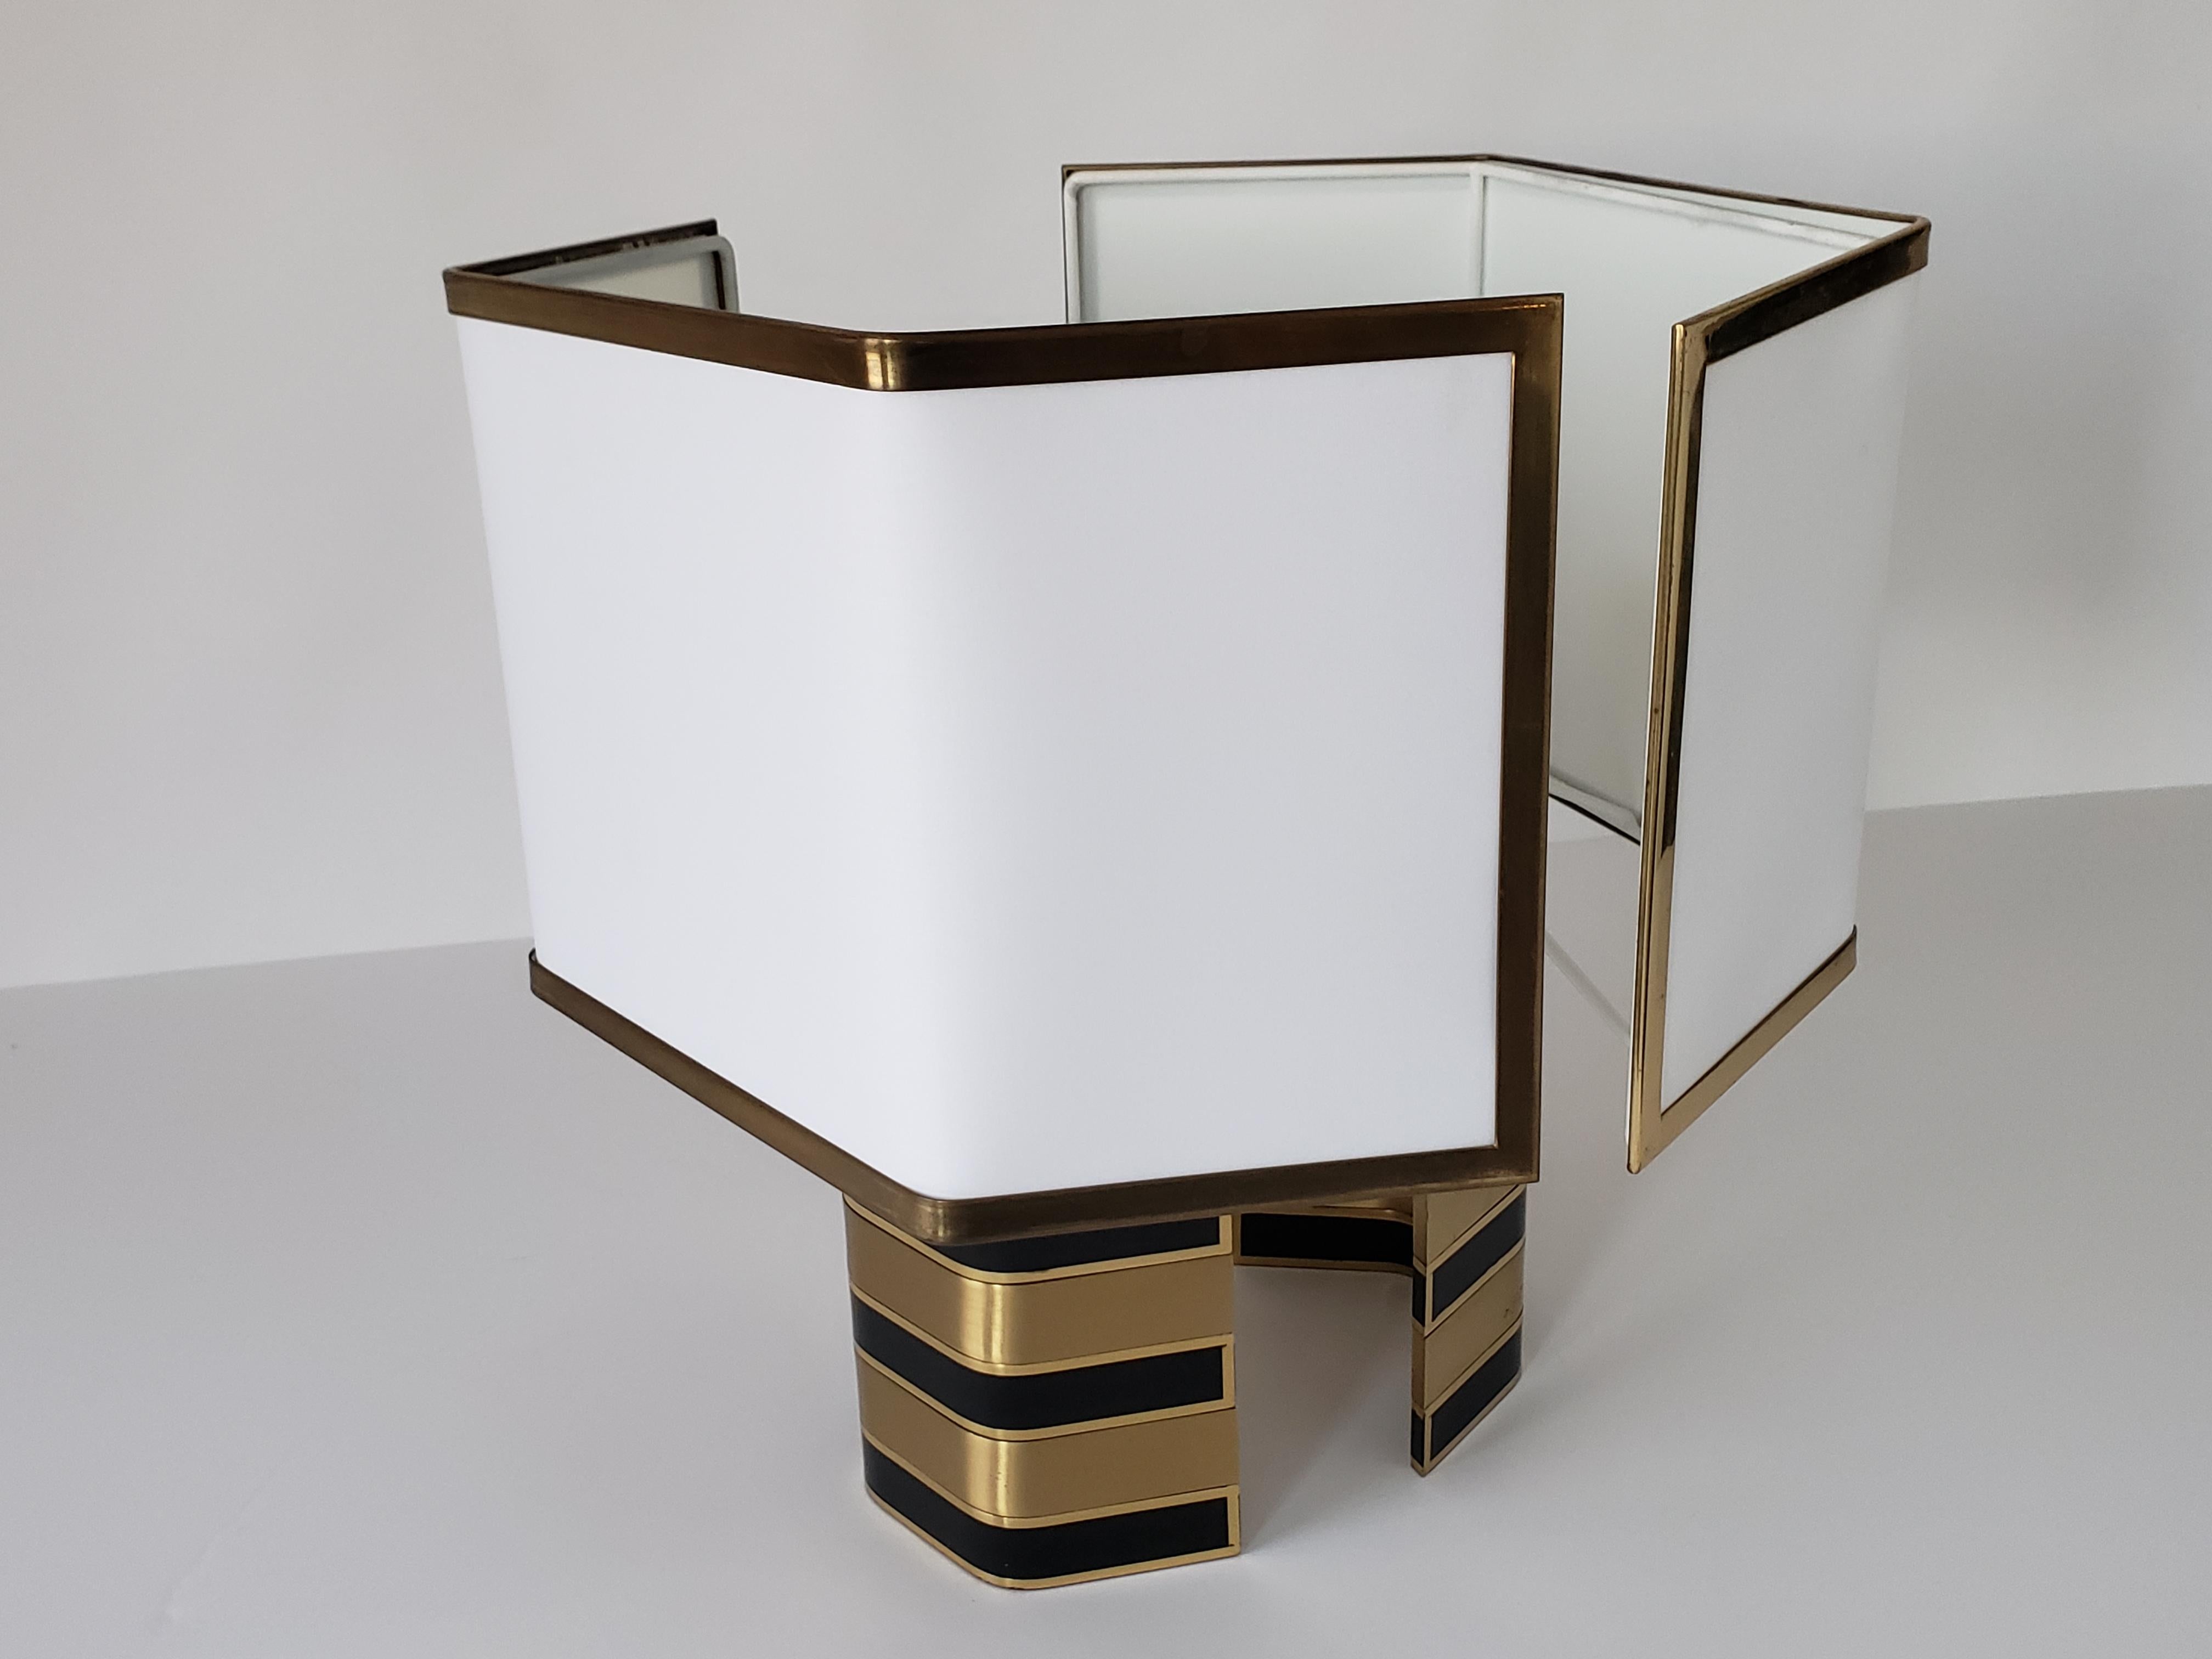 Rare open back designed table lamp for near wall installation from Romeo Rega.

The base is made of thick solid lacquered brass with enameled black brass horizontal insert. 

One regular E26 size socket rated at 100 watts maximum. 

Switch on